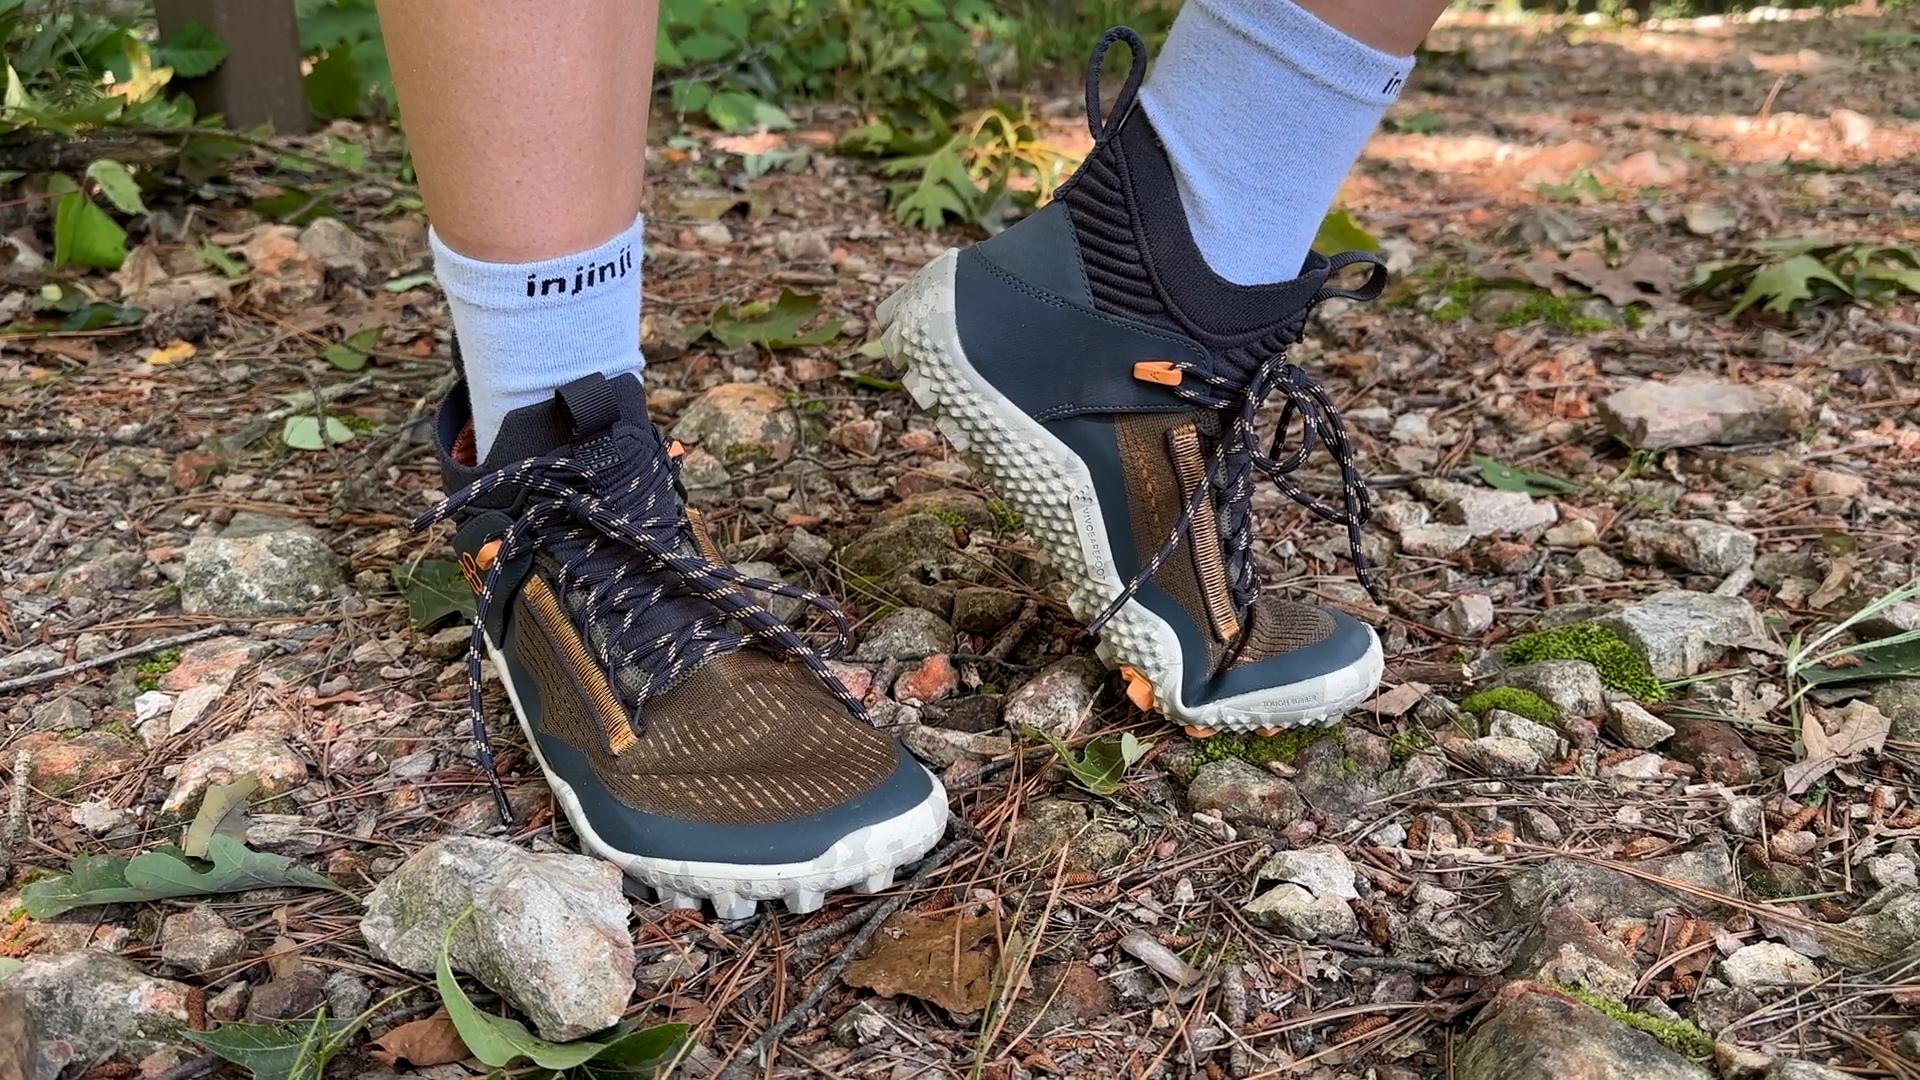 Wearing the Vivobarefoot Magna Lite SG hiking boots.